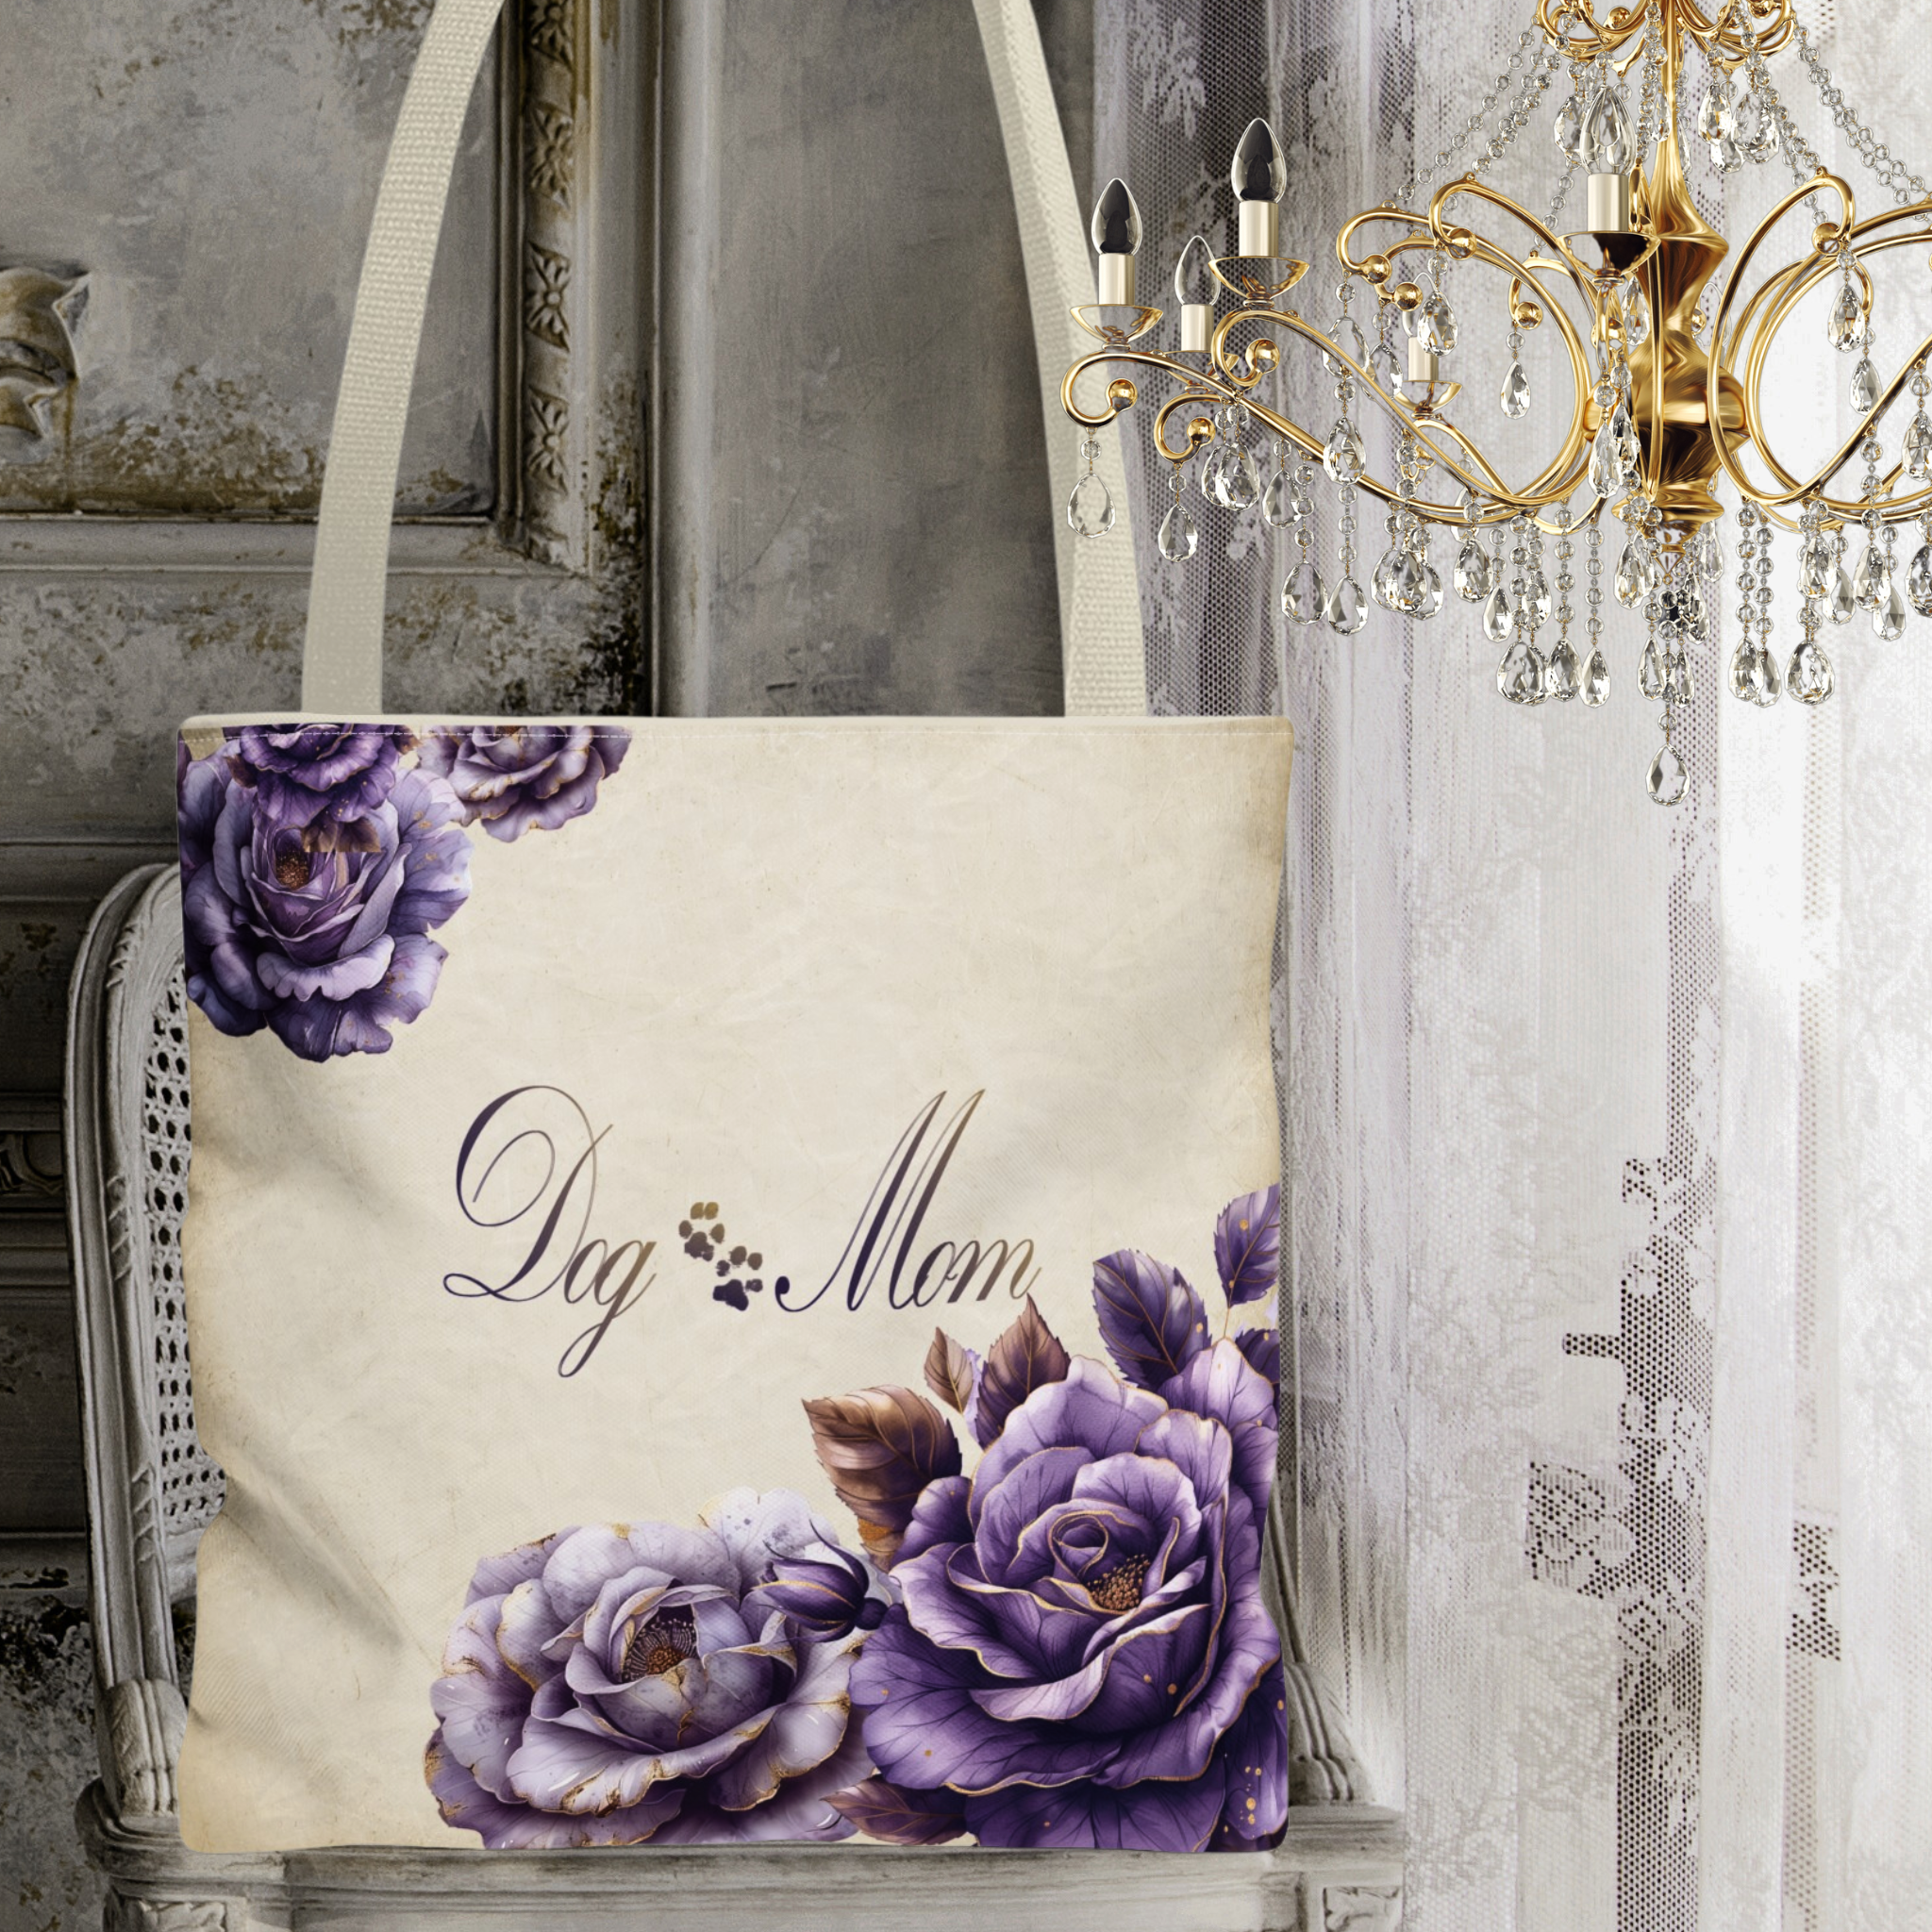 Dog Mom French Country Lavender Rose Farmhouse Tote - dog-mom-french-country-lavender-rose-tote